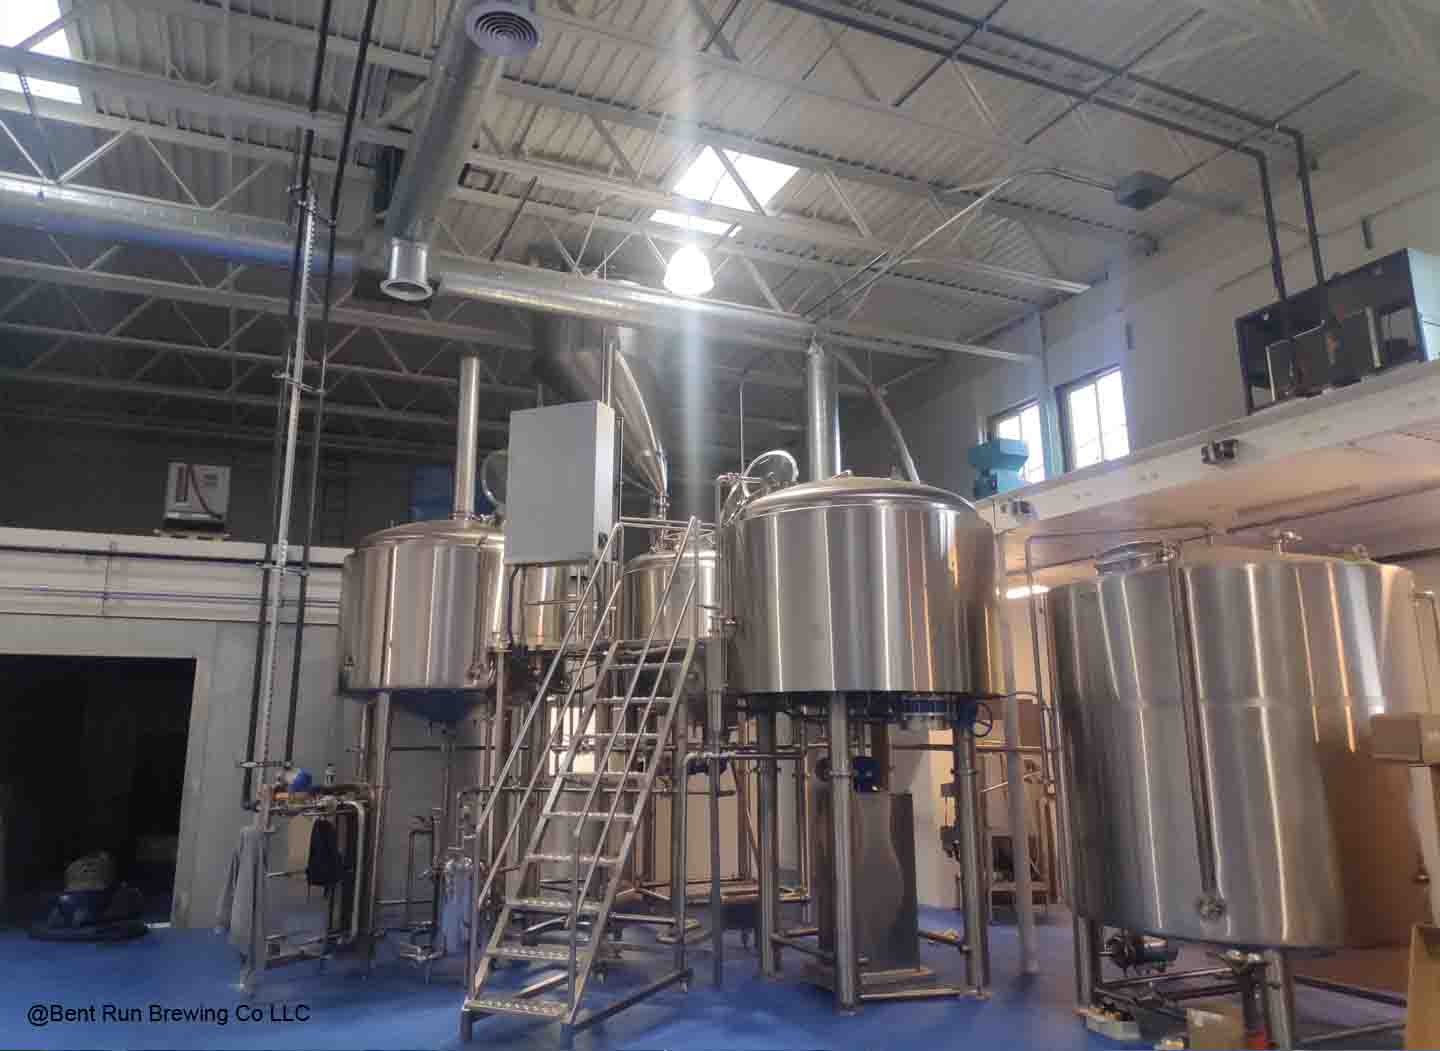 <b>With or without grist hopper on the beer brewery equipment?</b>